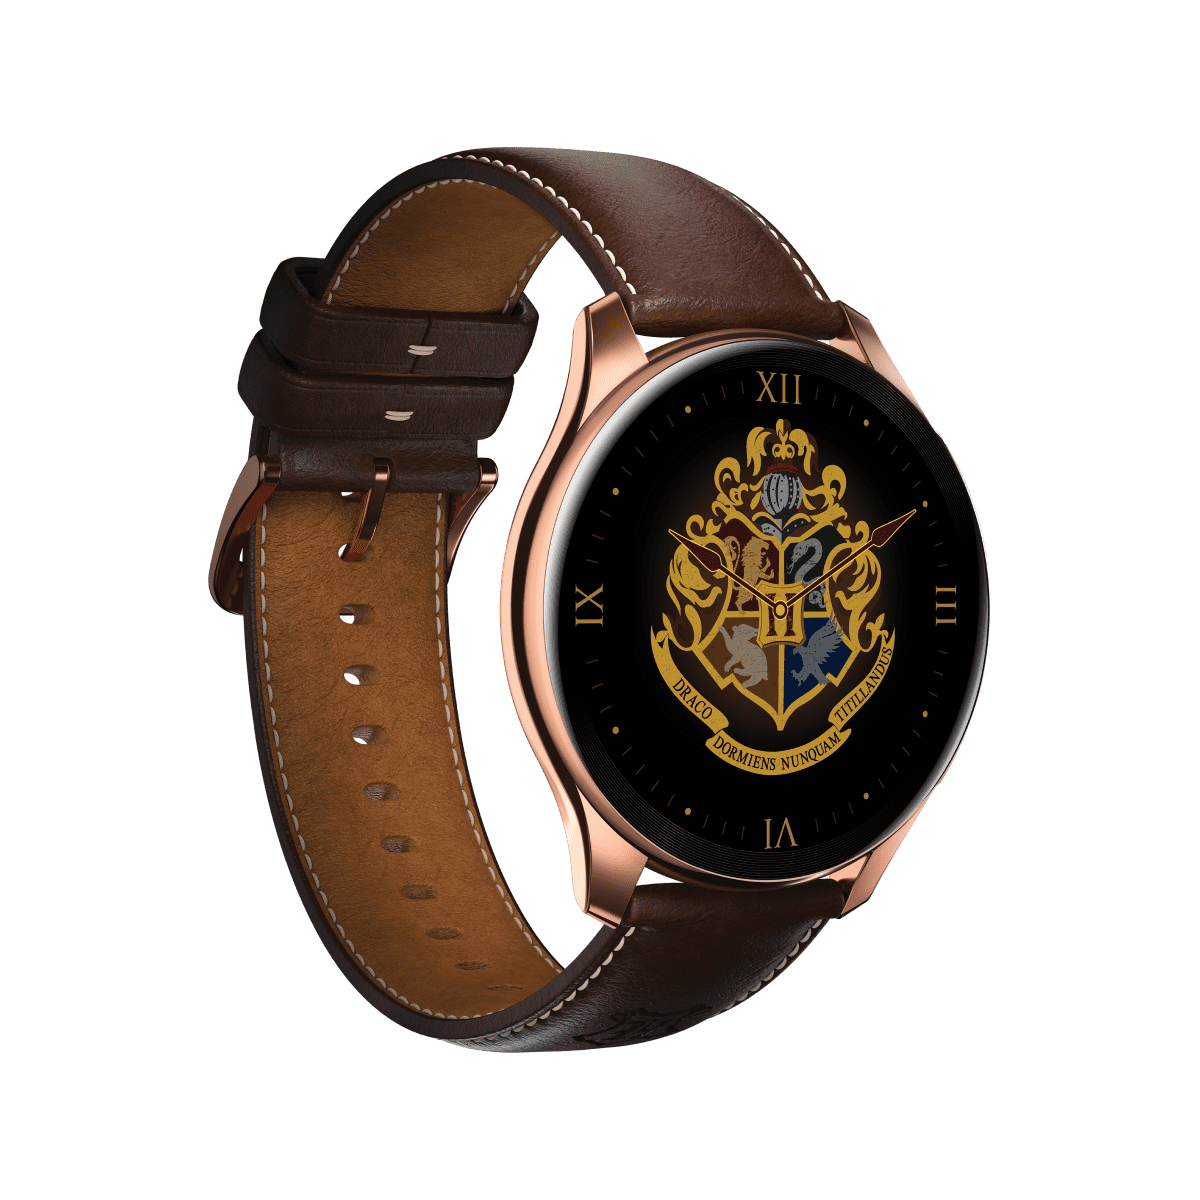 Oneplus Watch Harry Potter Limited Edition at Rs 1950/piece